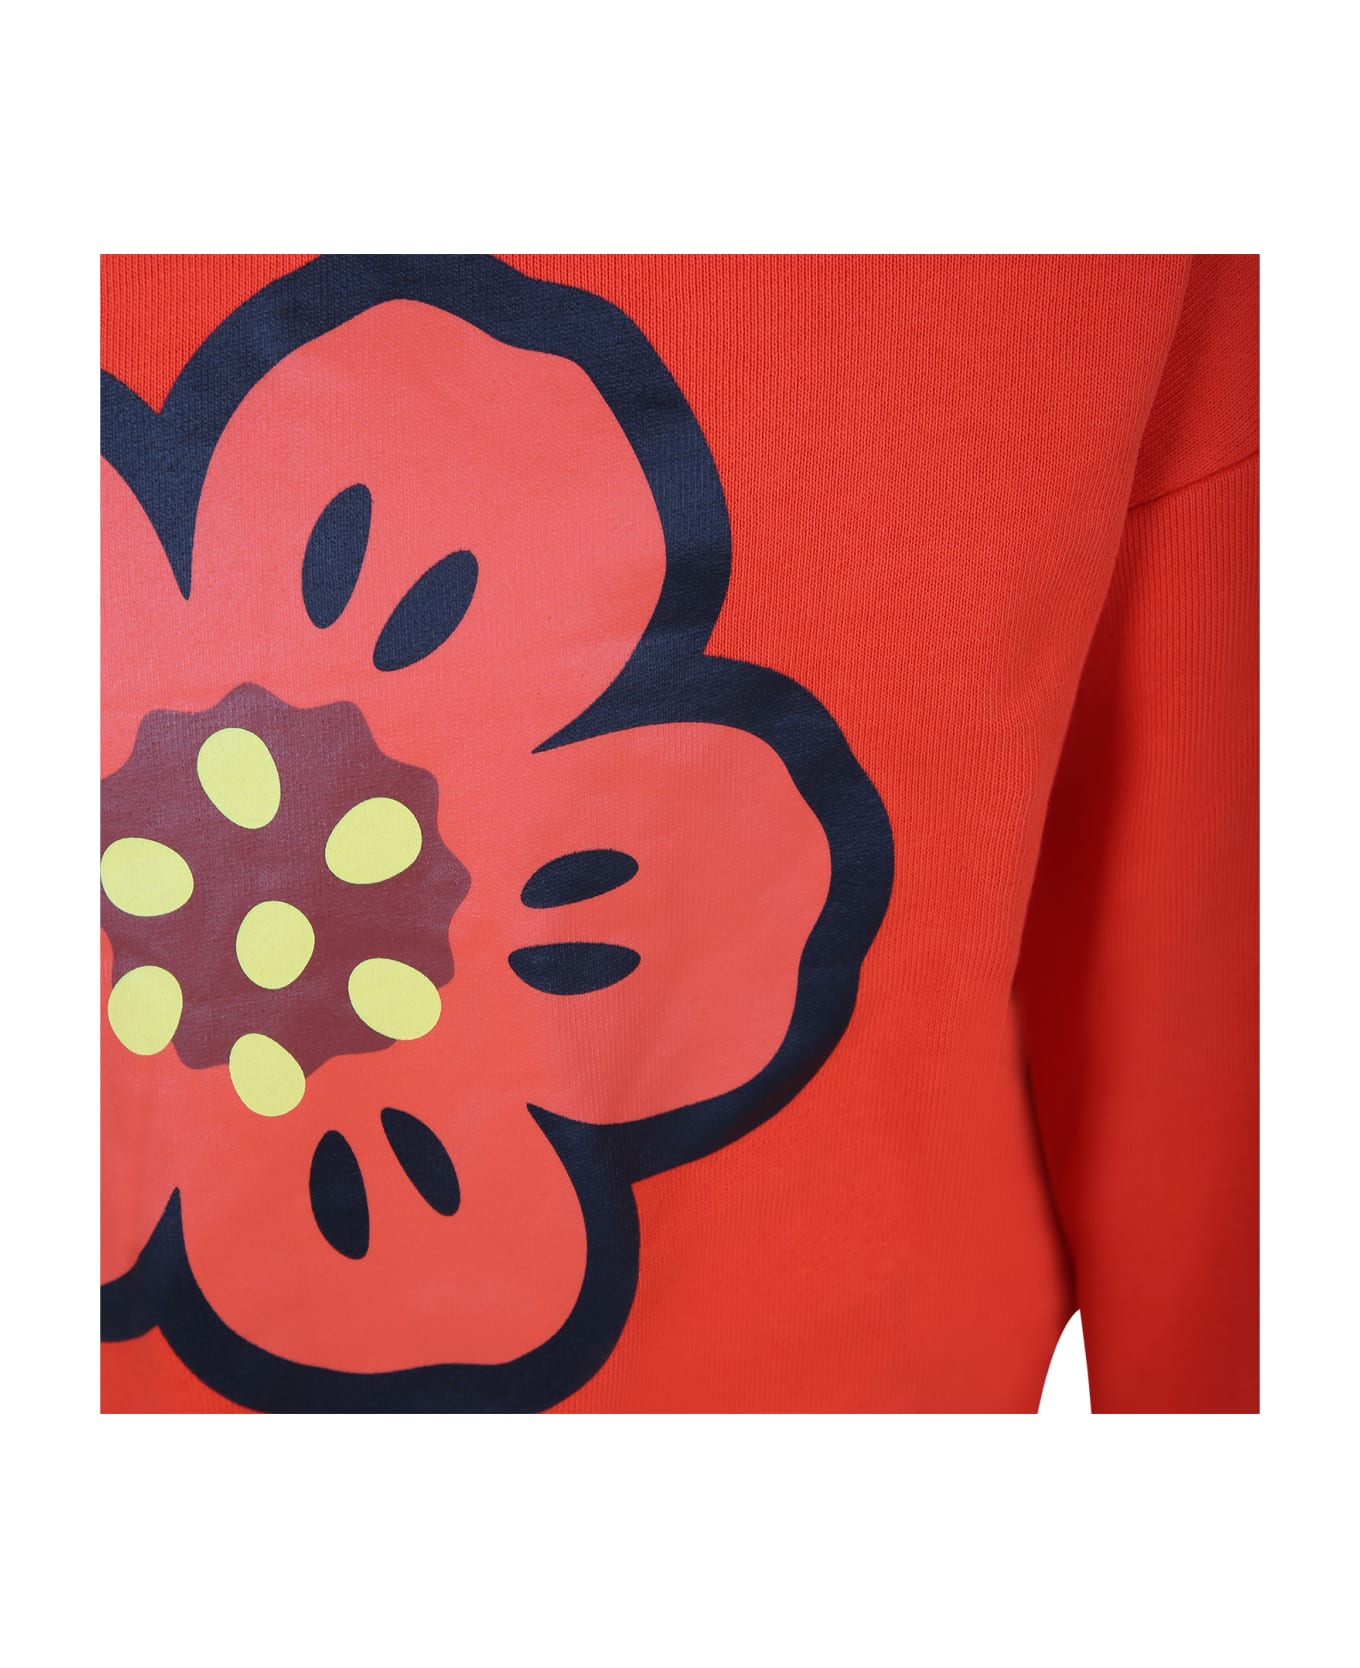 Kenzo Kids Red Sweatshirt For Girl With Flower - Rosso